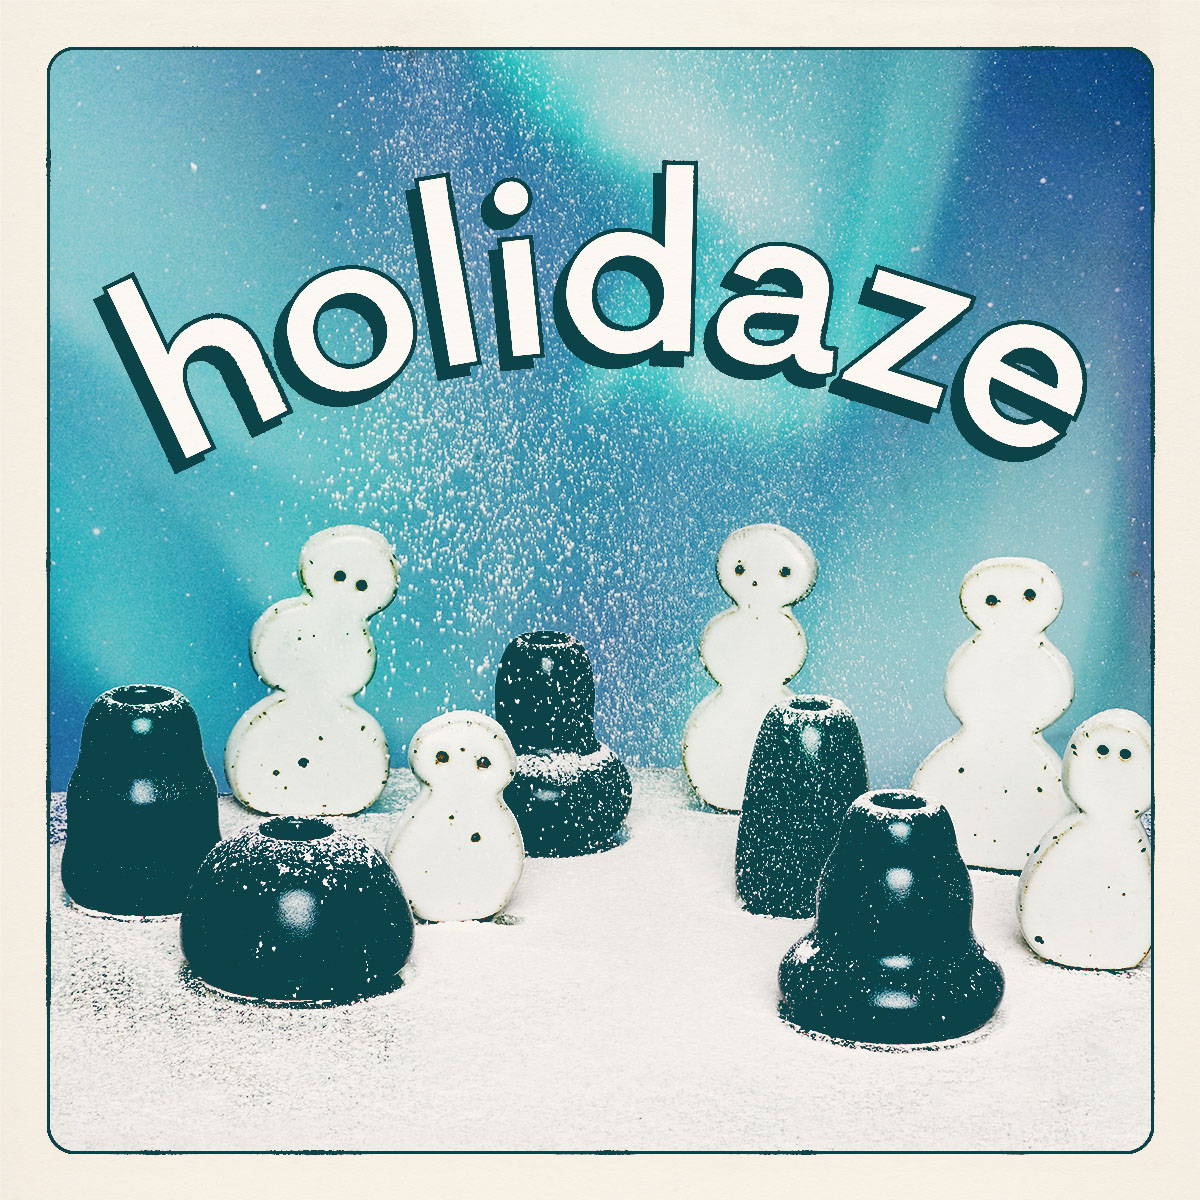 East Fork holiday music playlist on Spotify